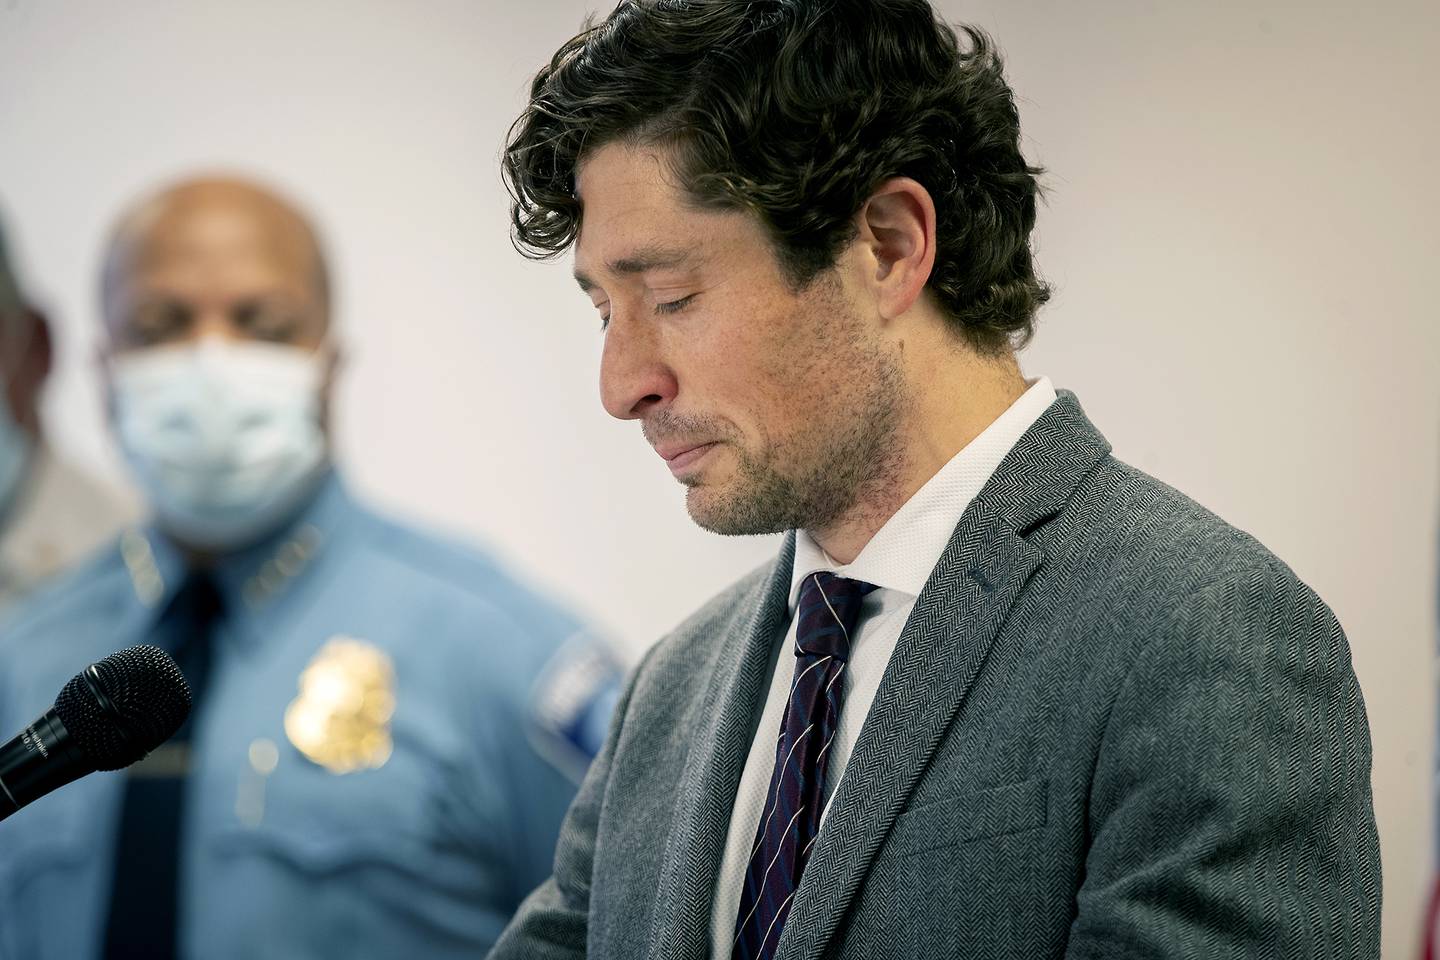 Minneapolis Mayor Jacob Frey speaks during a news conference Thursday, May 28, 2020, in Minneapolis, Minn.